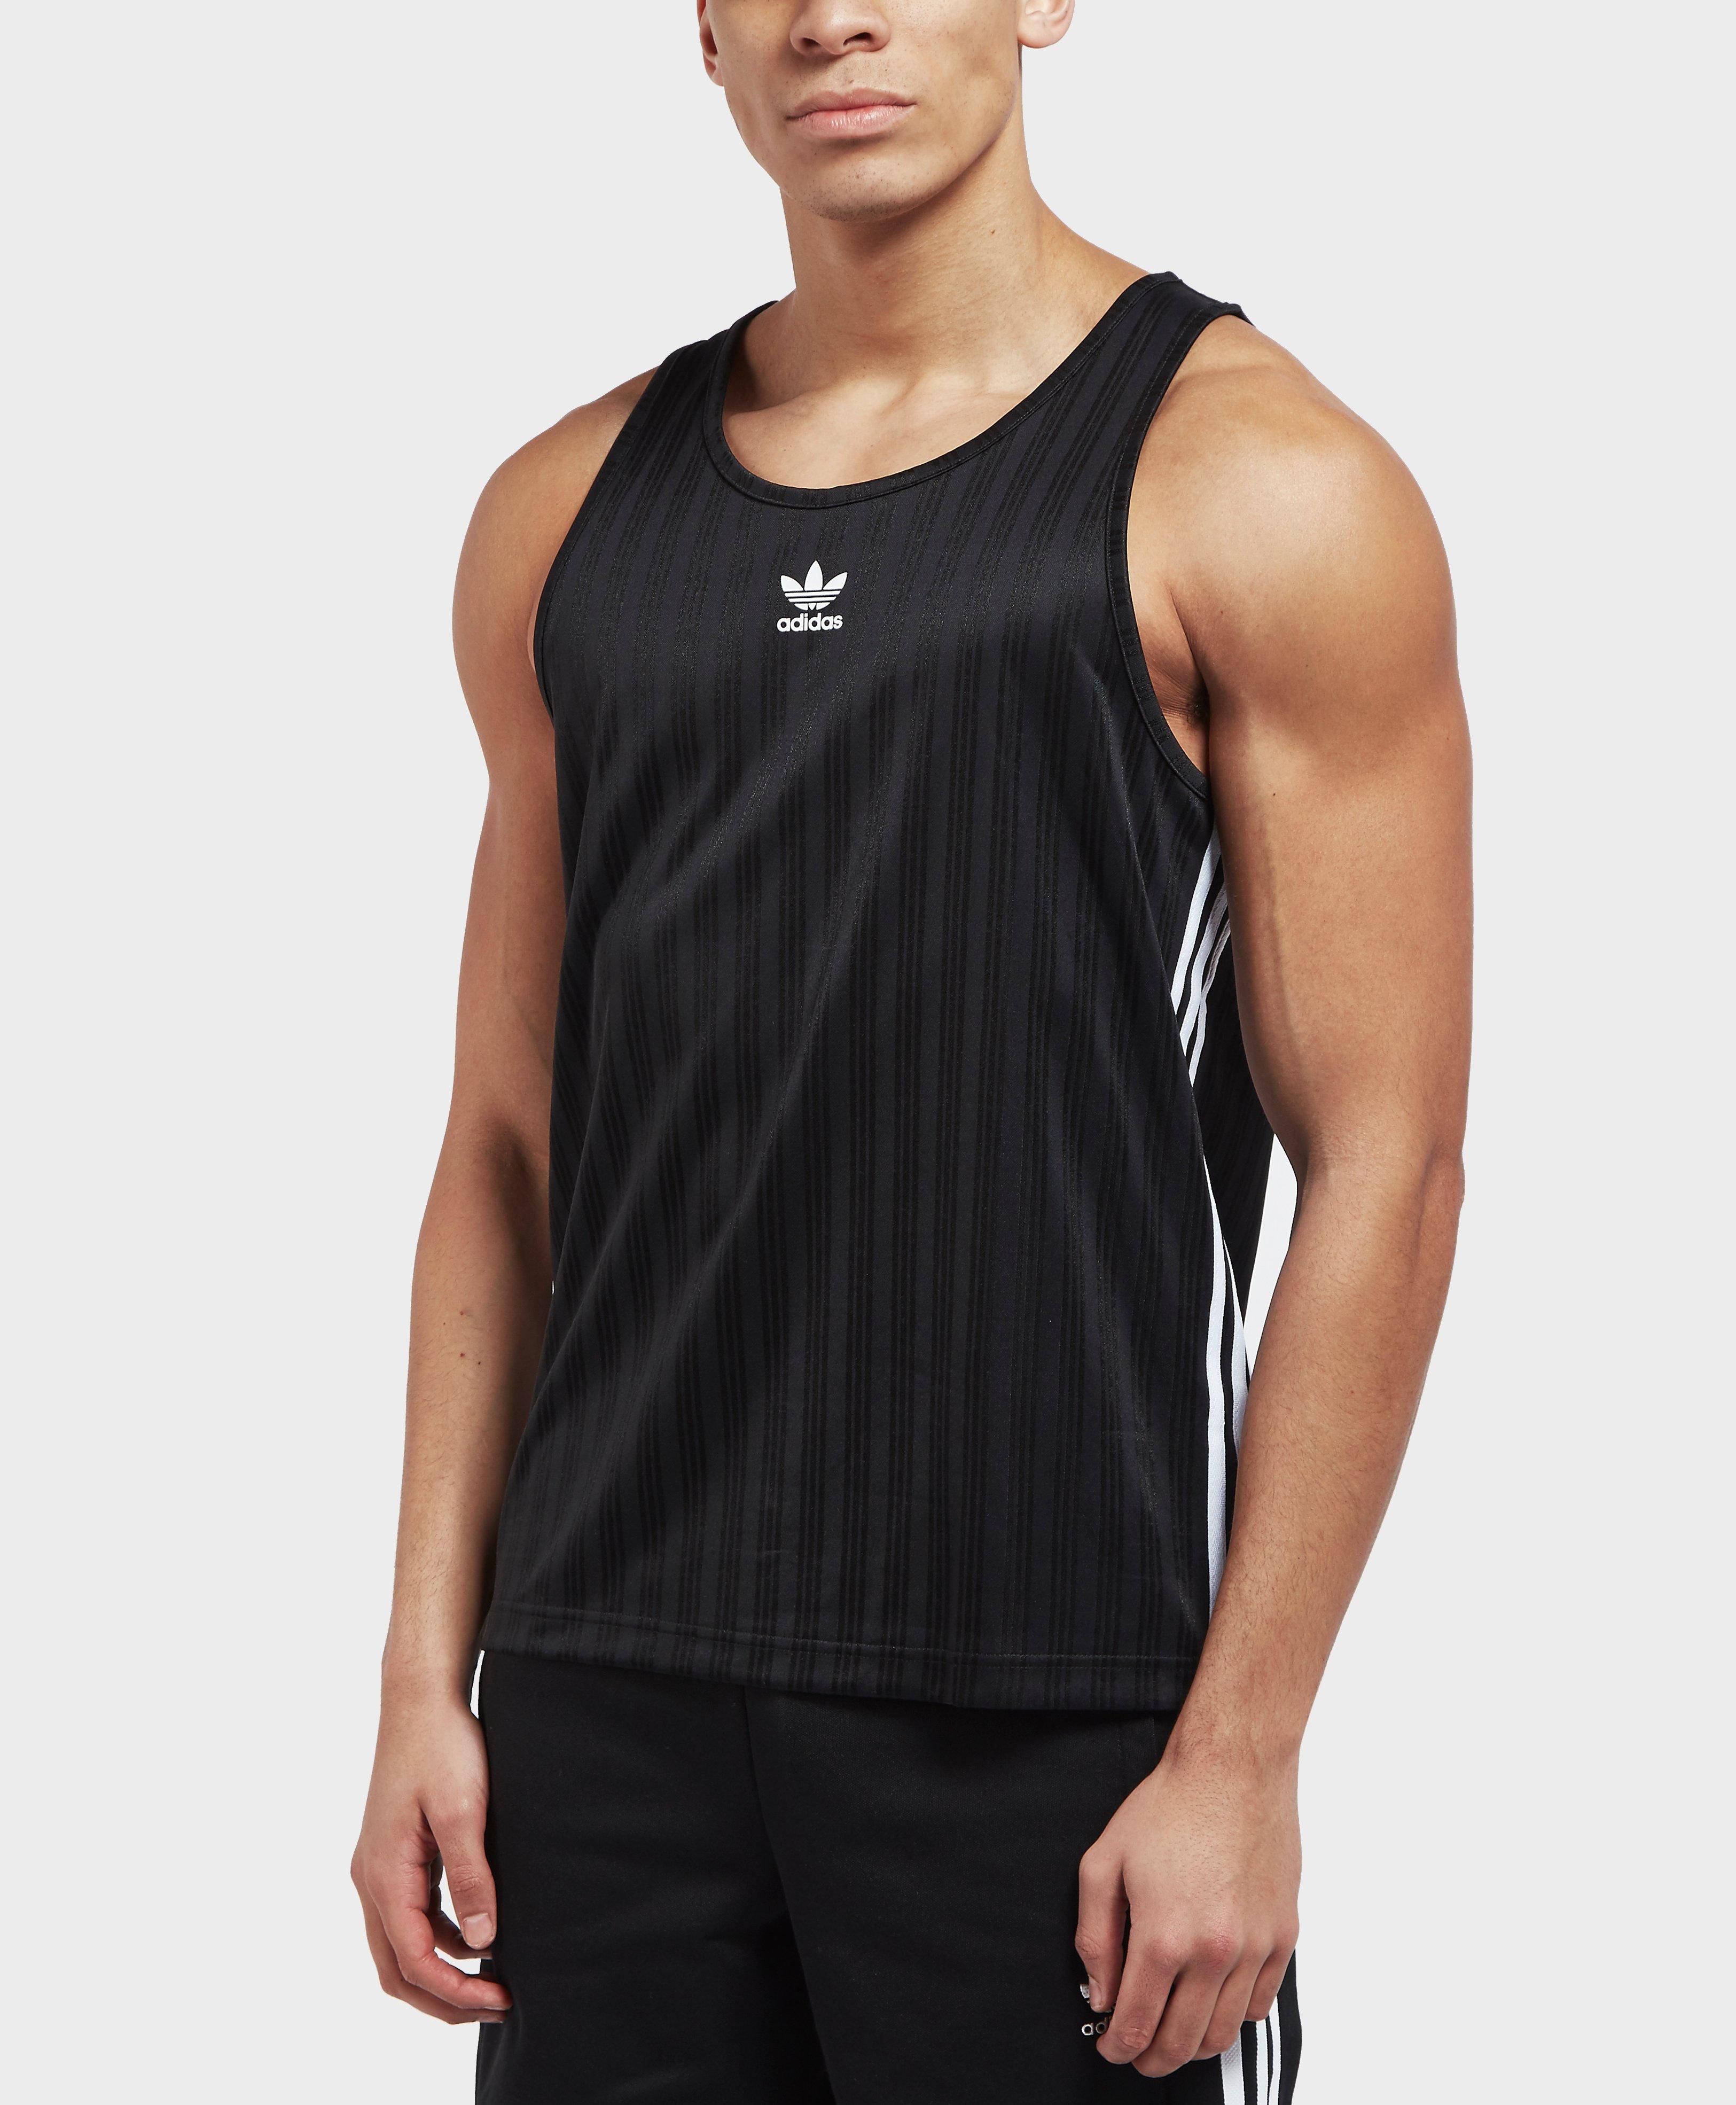 adidas Originals Synthetic Football Tank Top in Black for Men - Lyst